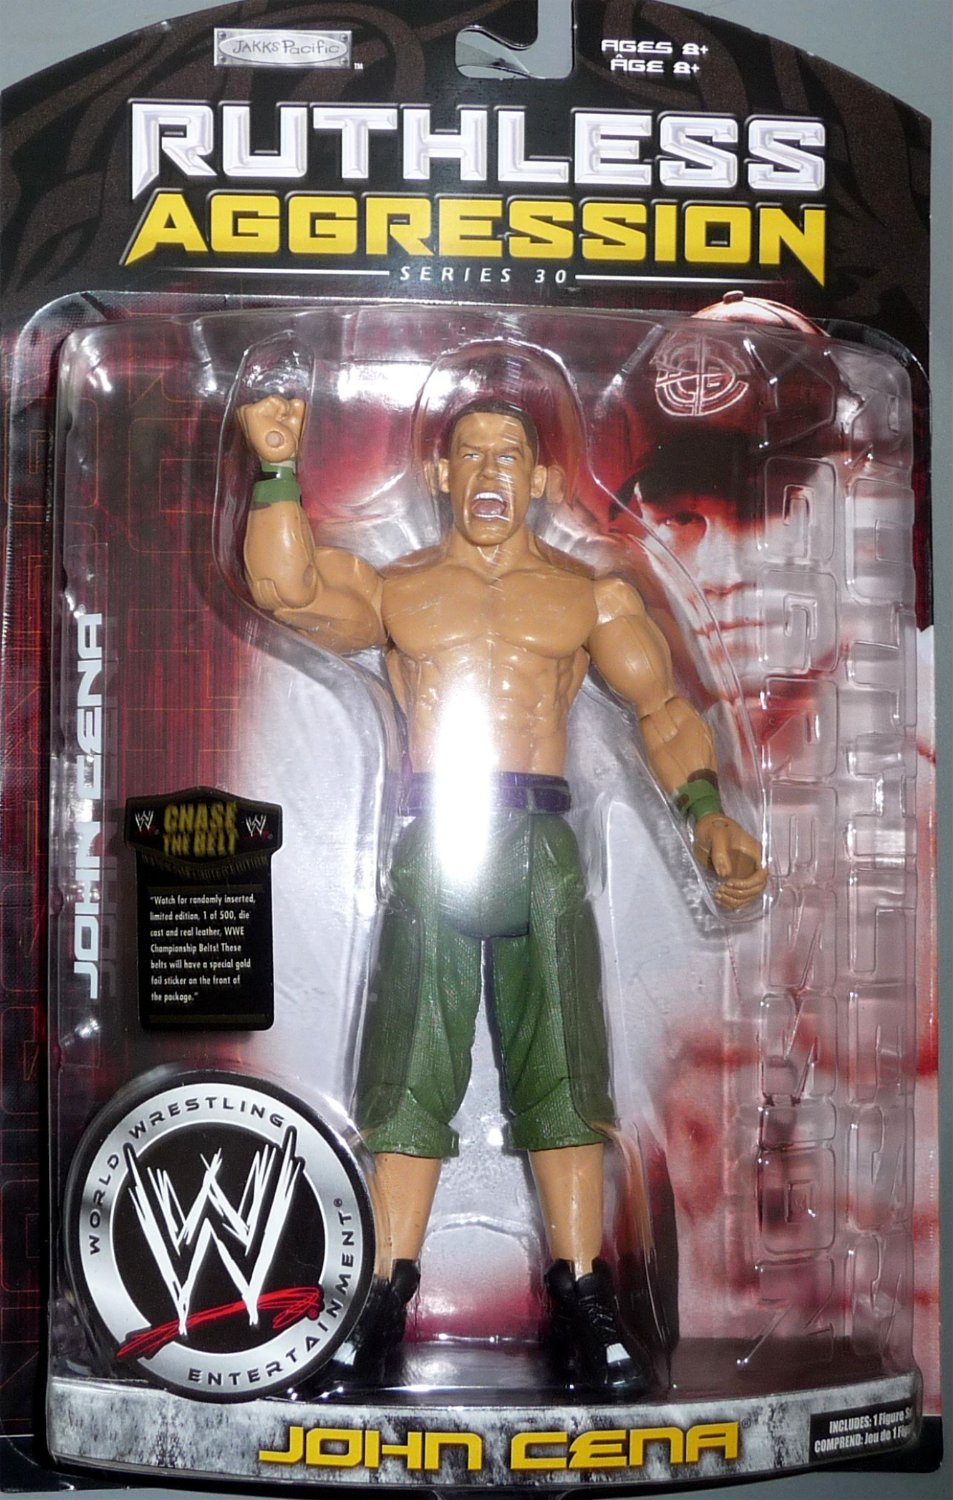 WWE WWF WCW TNA Jakks Pacific Ruthless Aggression 2003 Action Figure Details about   JOHN CENA 